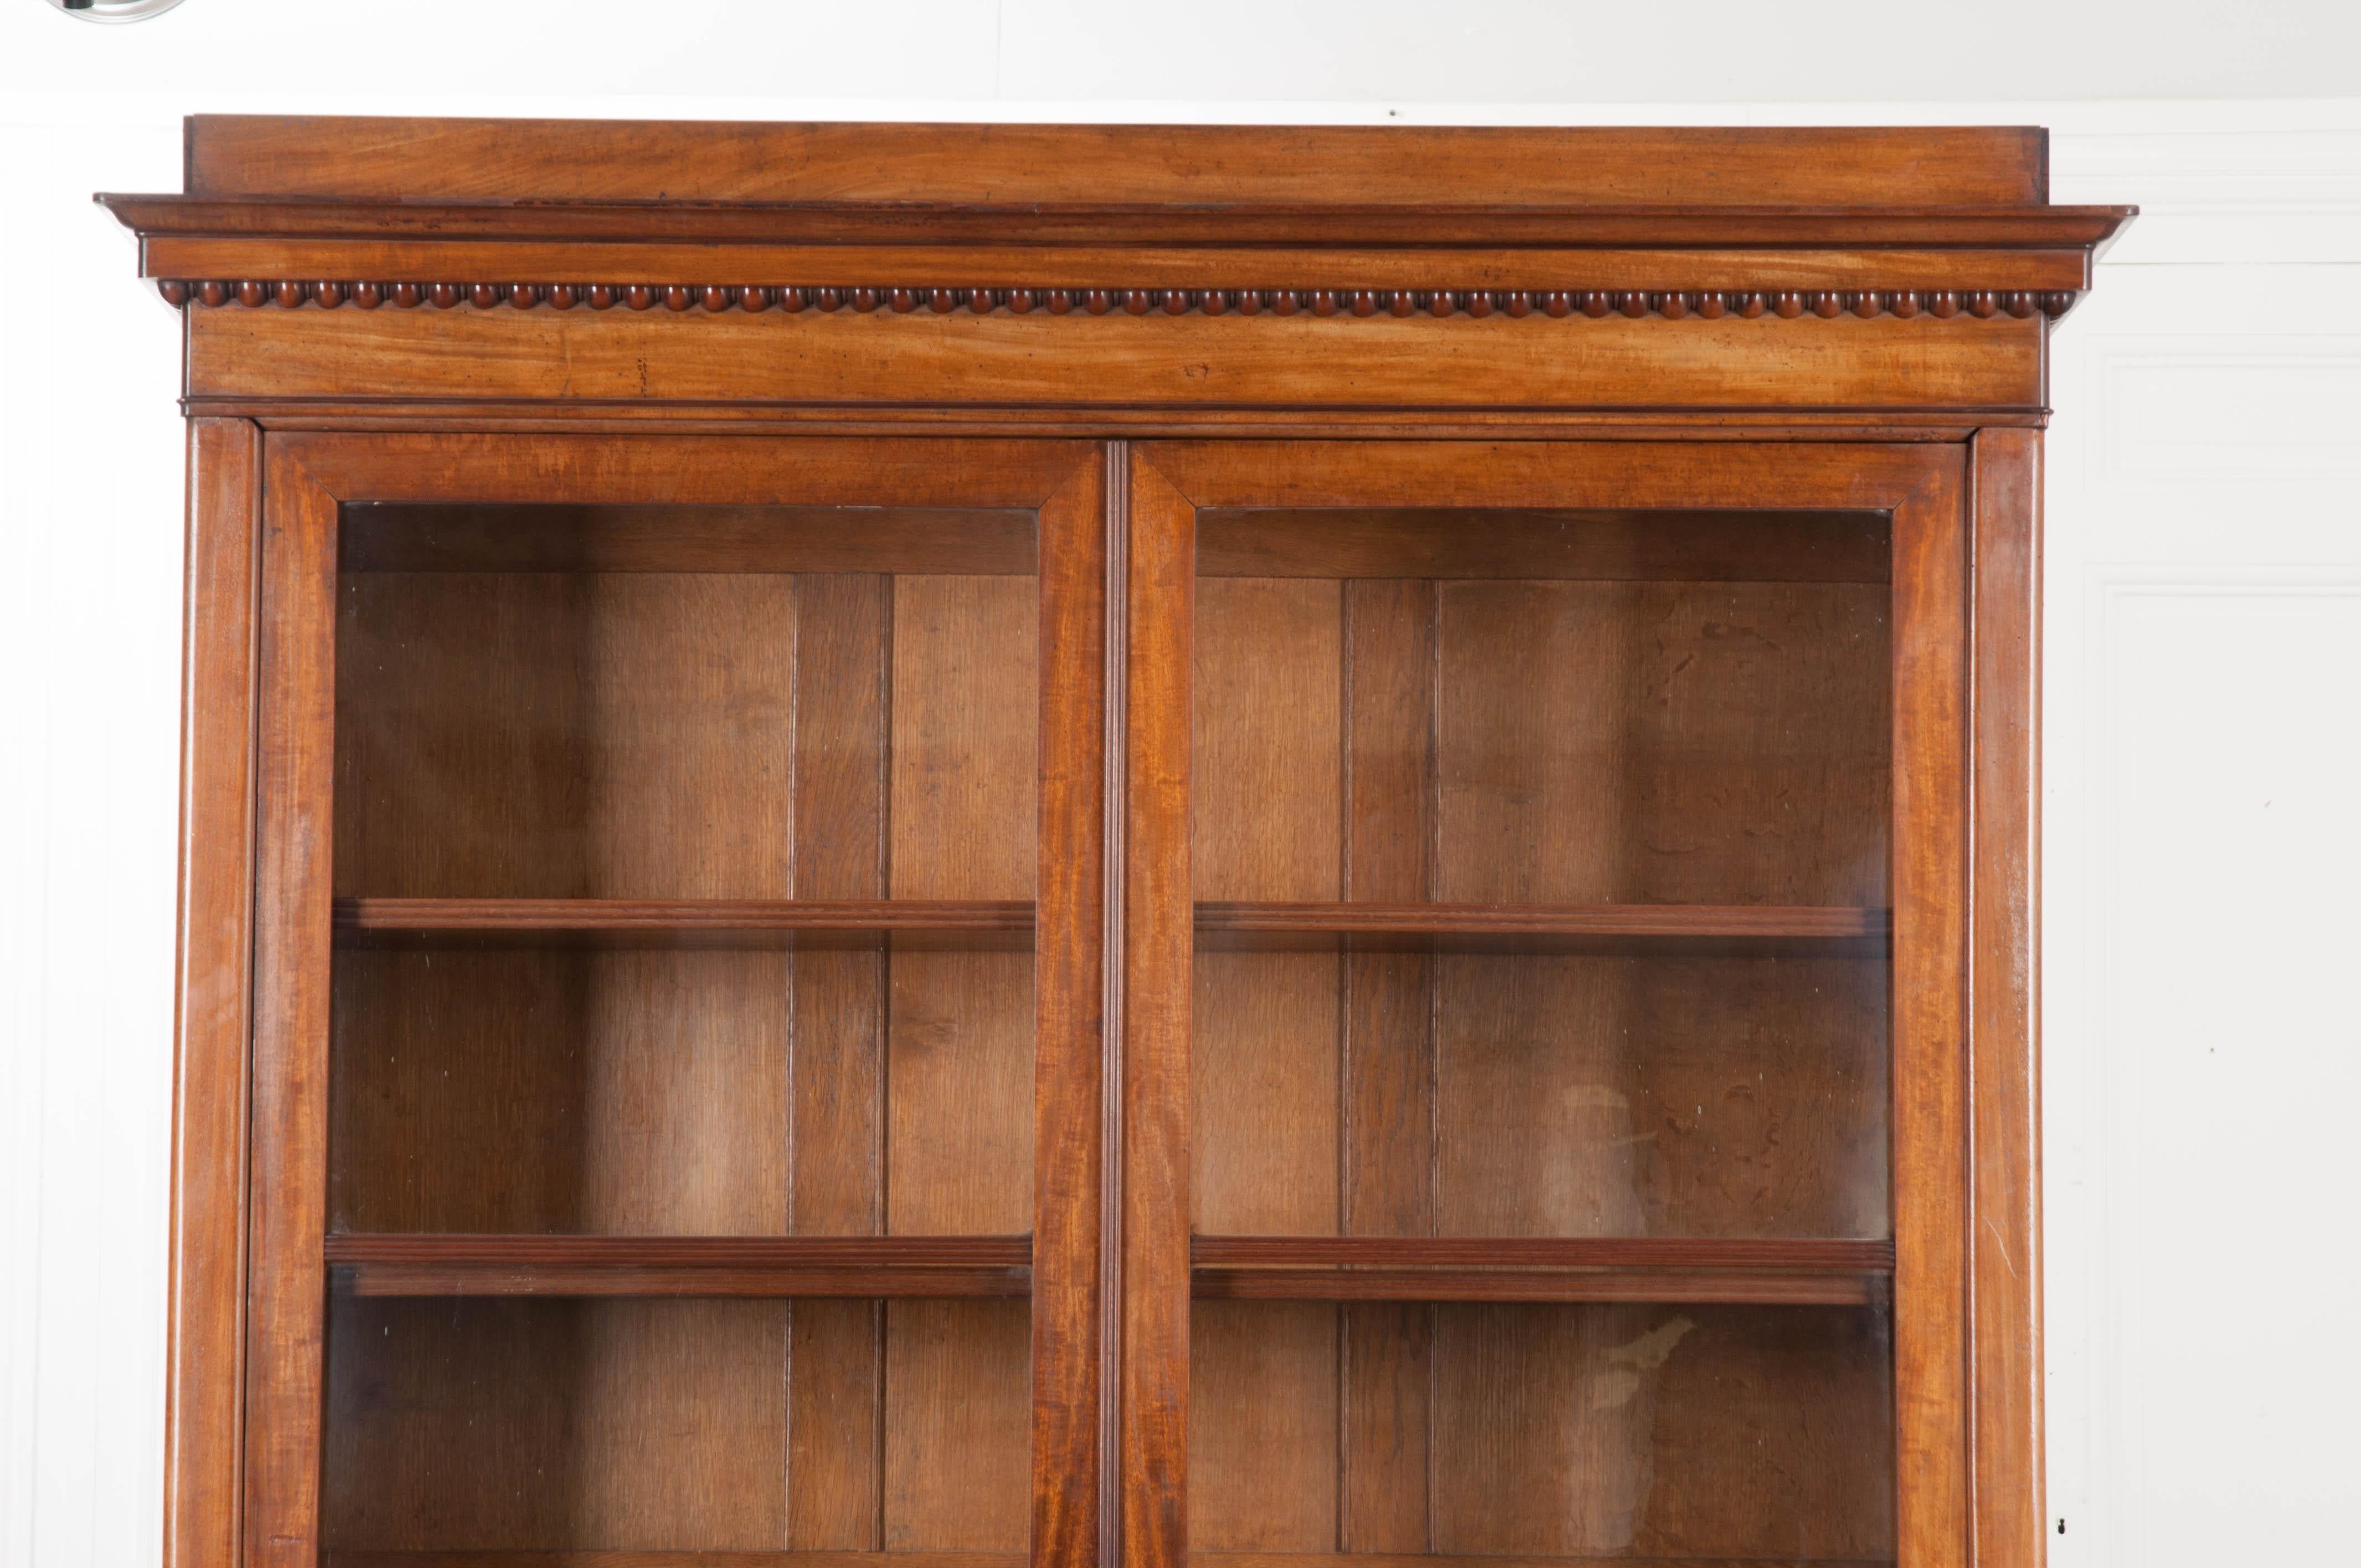 A handsome French bibliothèque, made of mahogany, from the latter part of the 19th century. The bookcase has two glass front doors, which can be locked, that close before the antique’s interior. The bibliothèque has one key. The doors have large